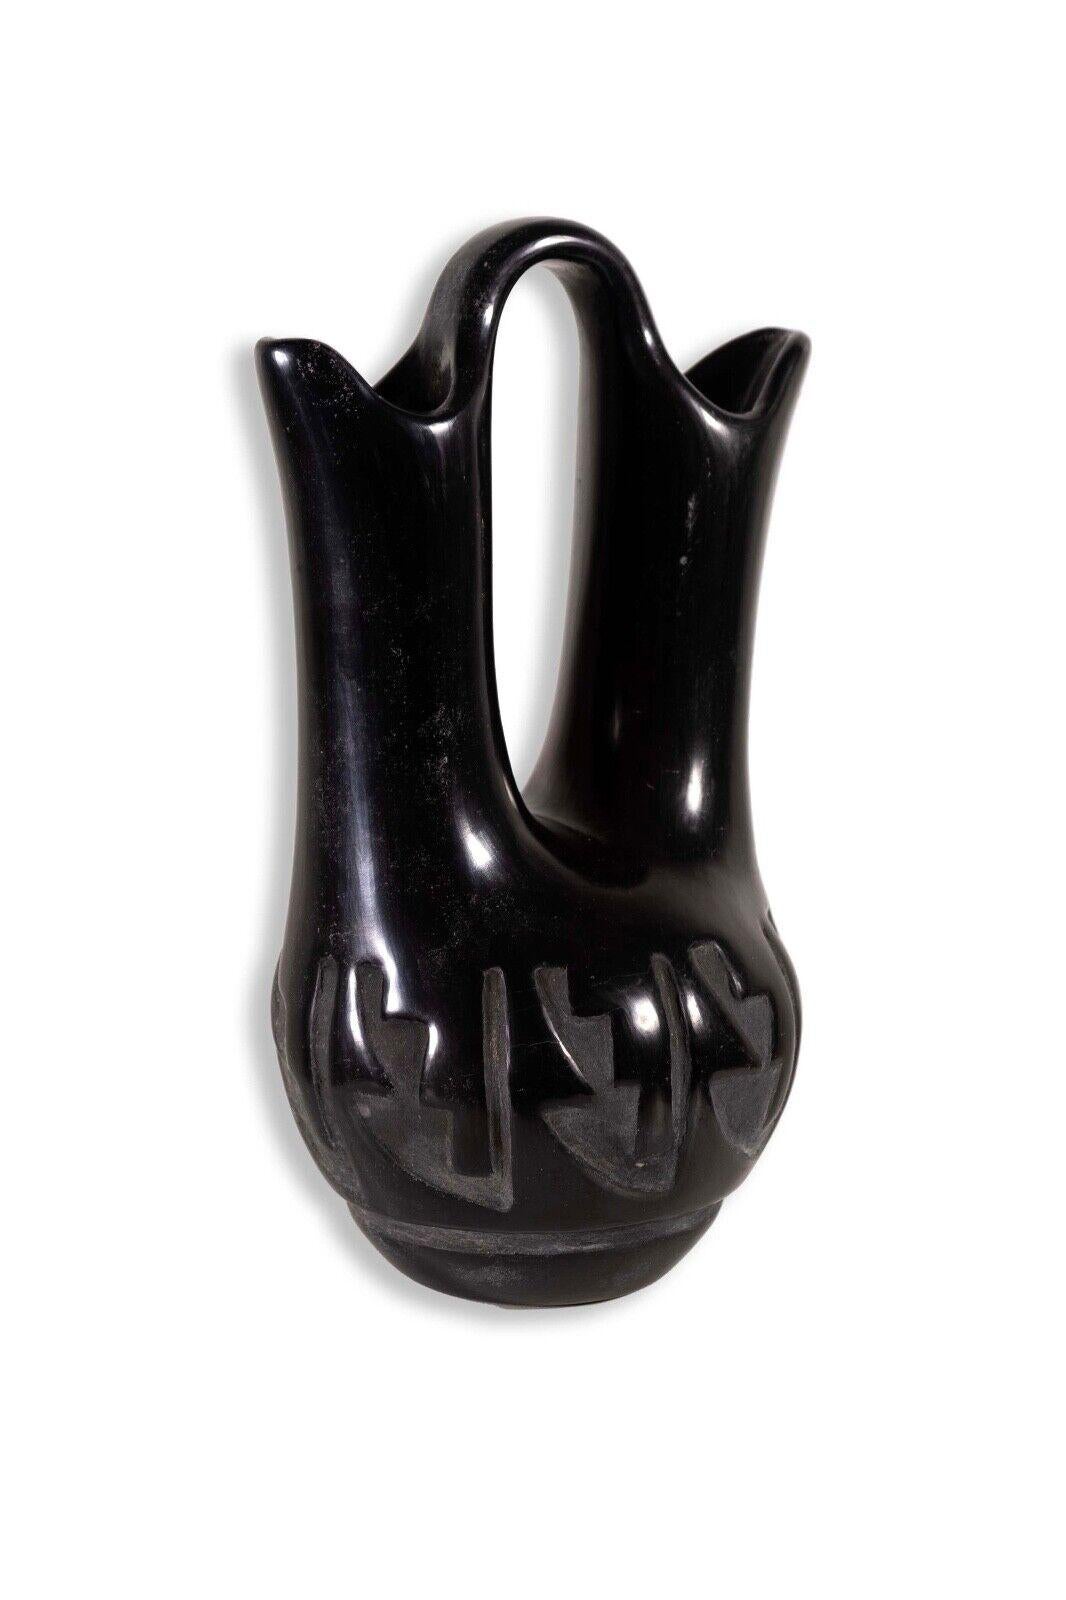 An exquisitely carved Santa Clara Pueblo blackware pottery by Southwest Native Legoria Tafoya. Etched signature on bottom of the sculpture. An iconic example of pueblo pottery with a rounded base with two spouts. Polished to showcase a high gloss